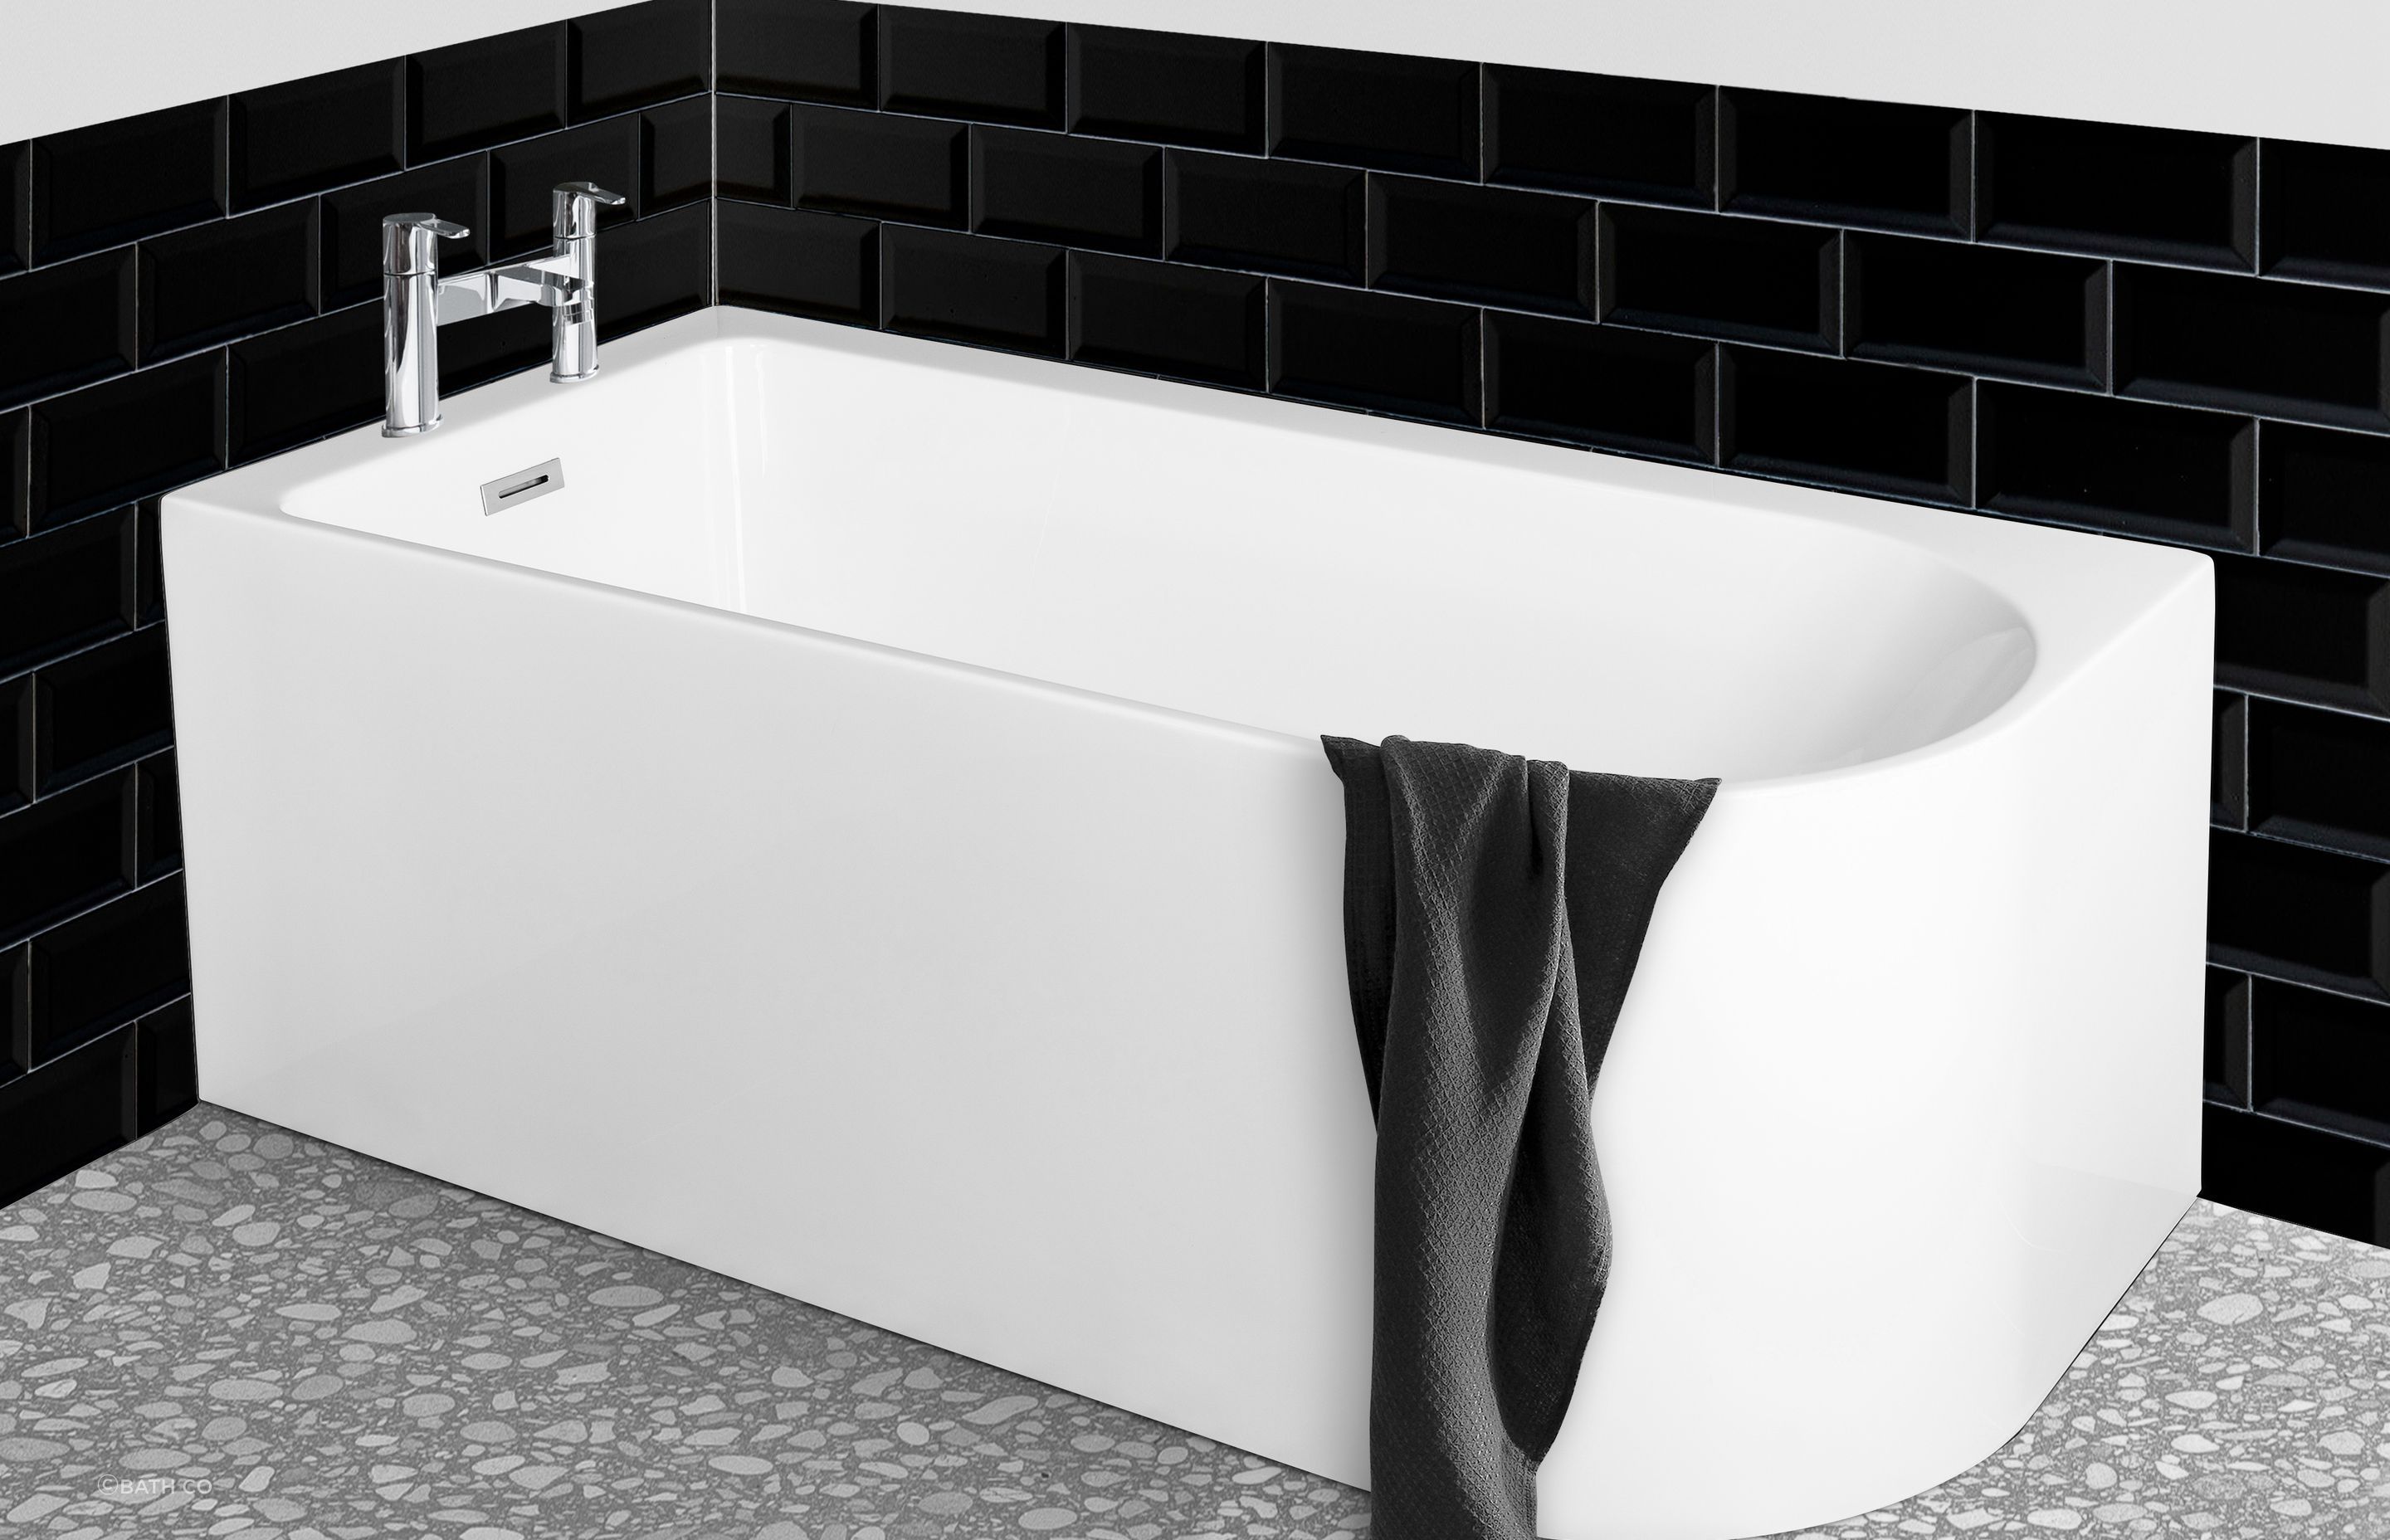 Options like the Curve Corner Acrylic Bath is the ideal solution for small bathrooms